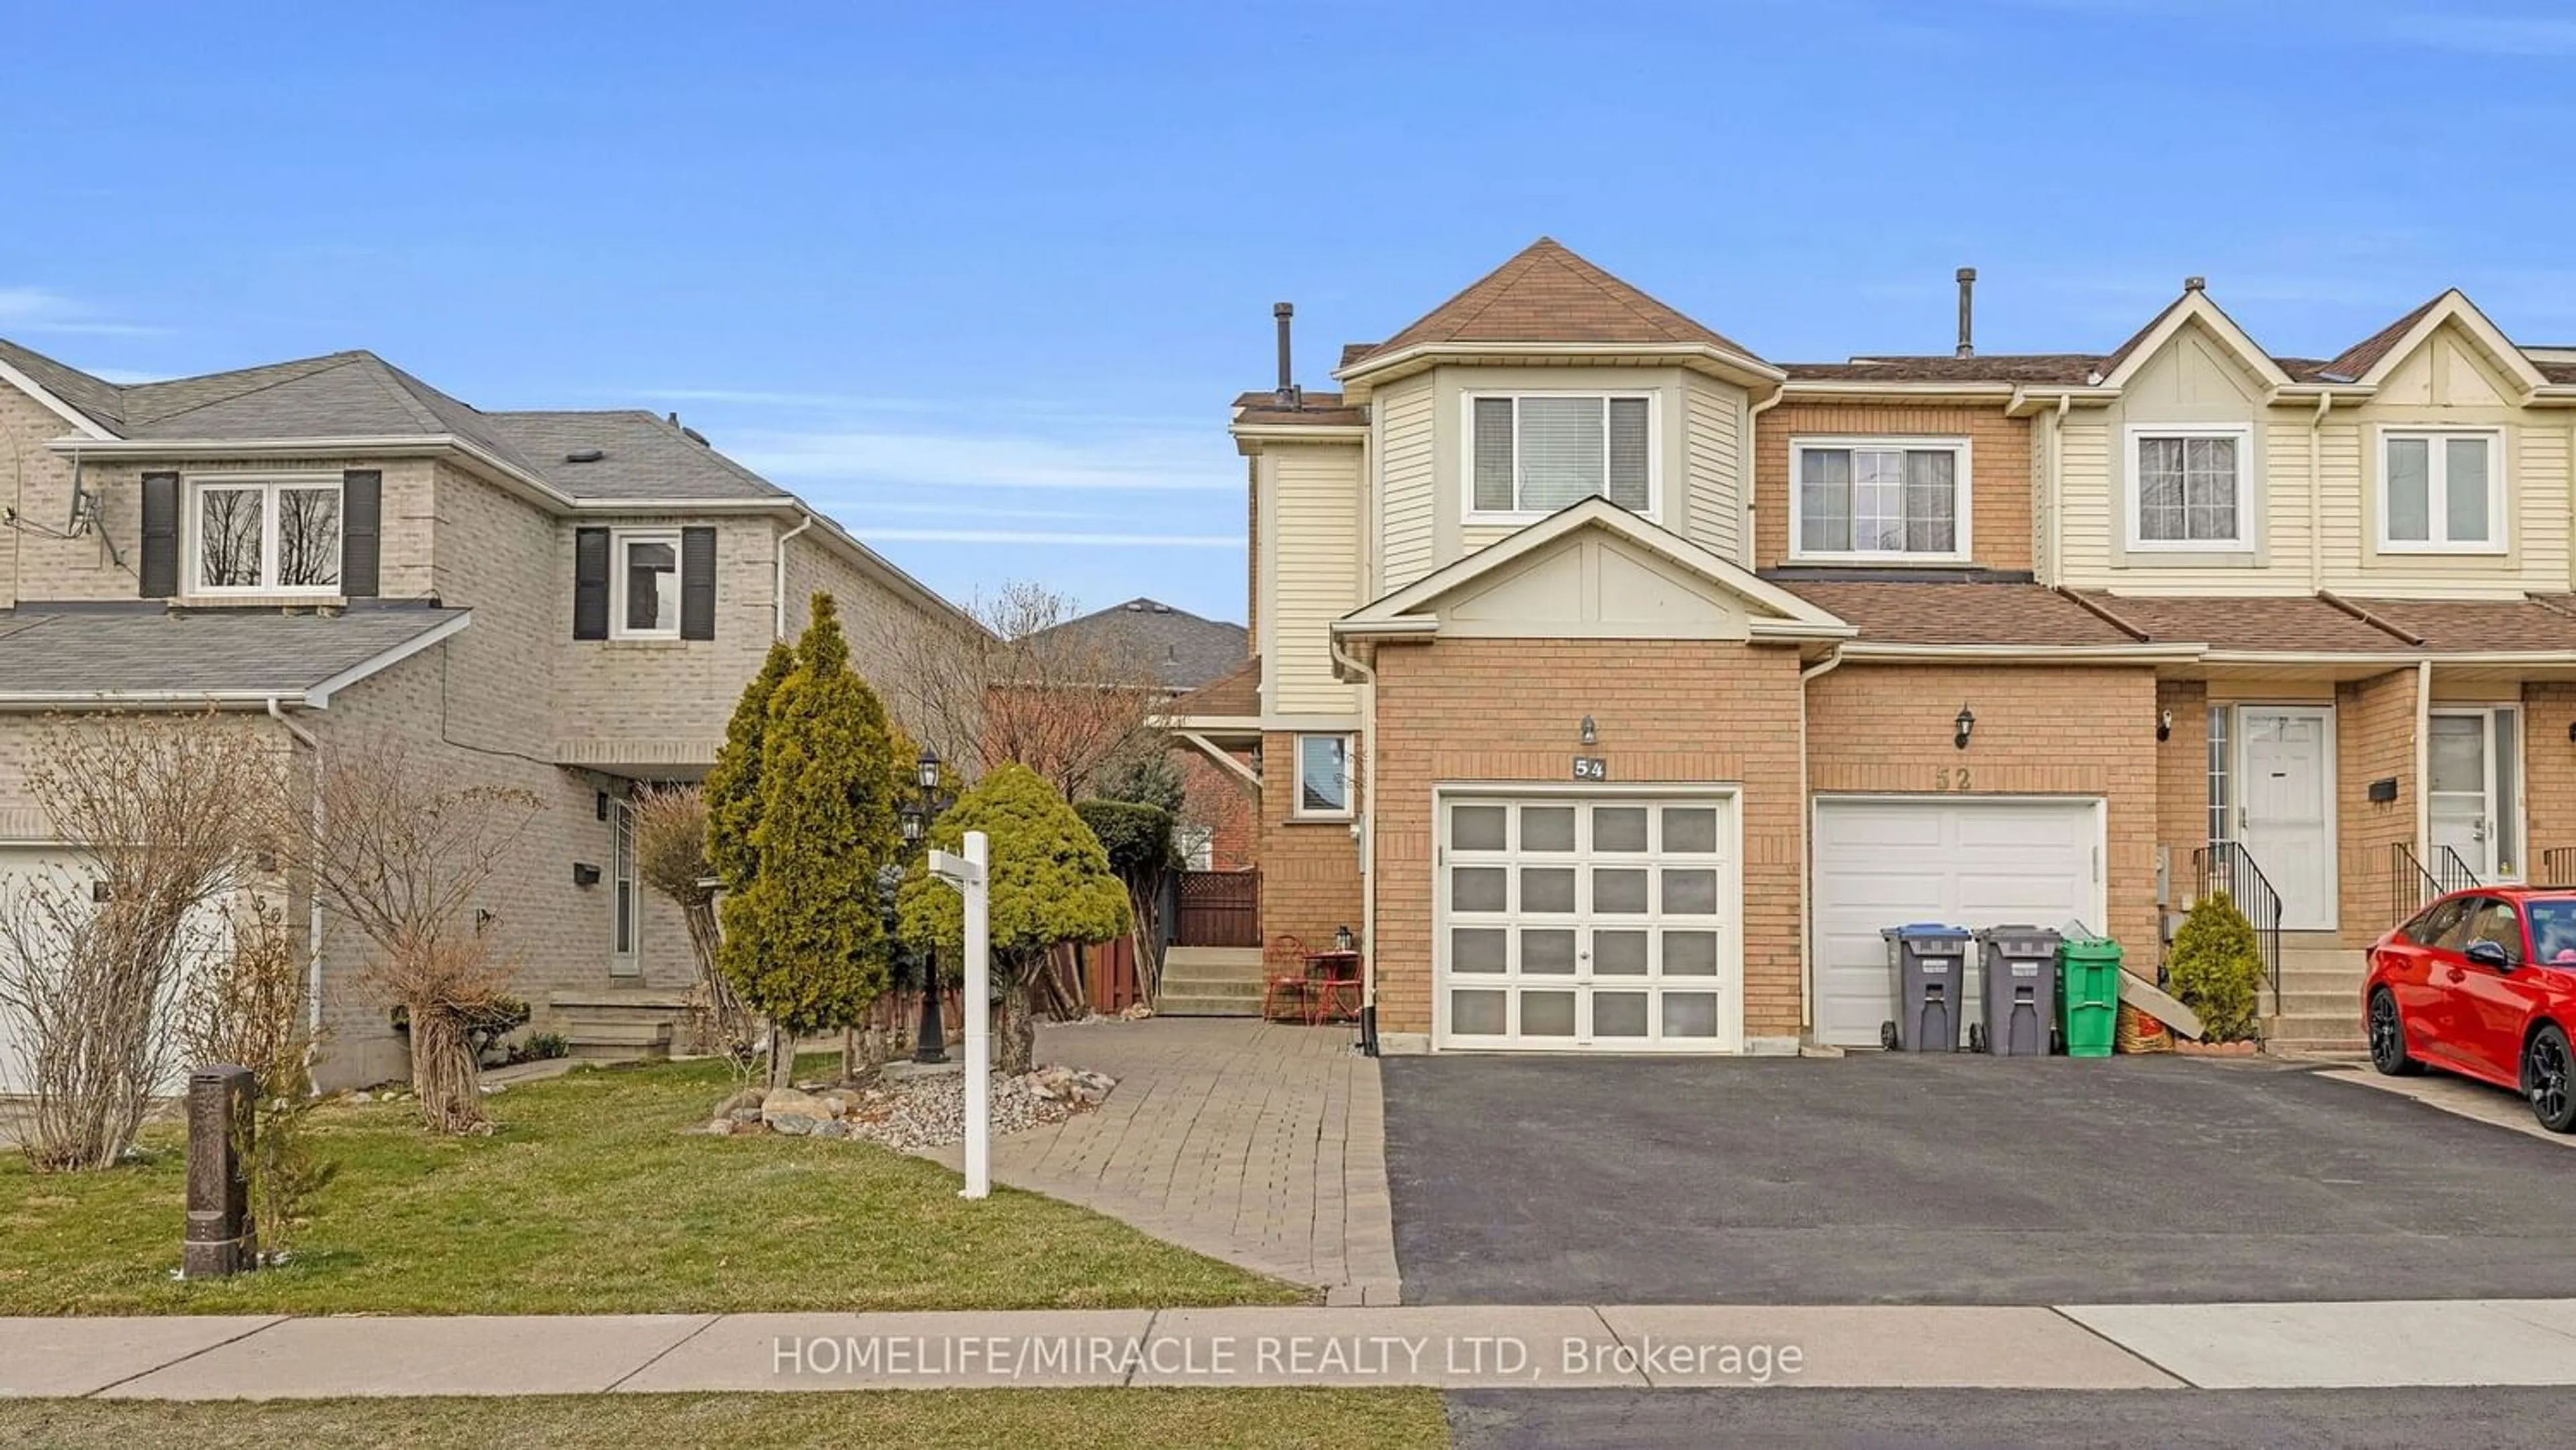 Home with unknown exterior material for 54 Millstone Dr, Brampton Ontario L6Y 4P5